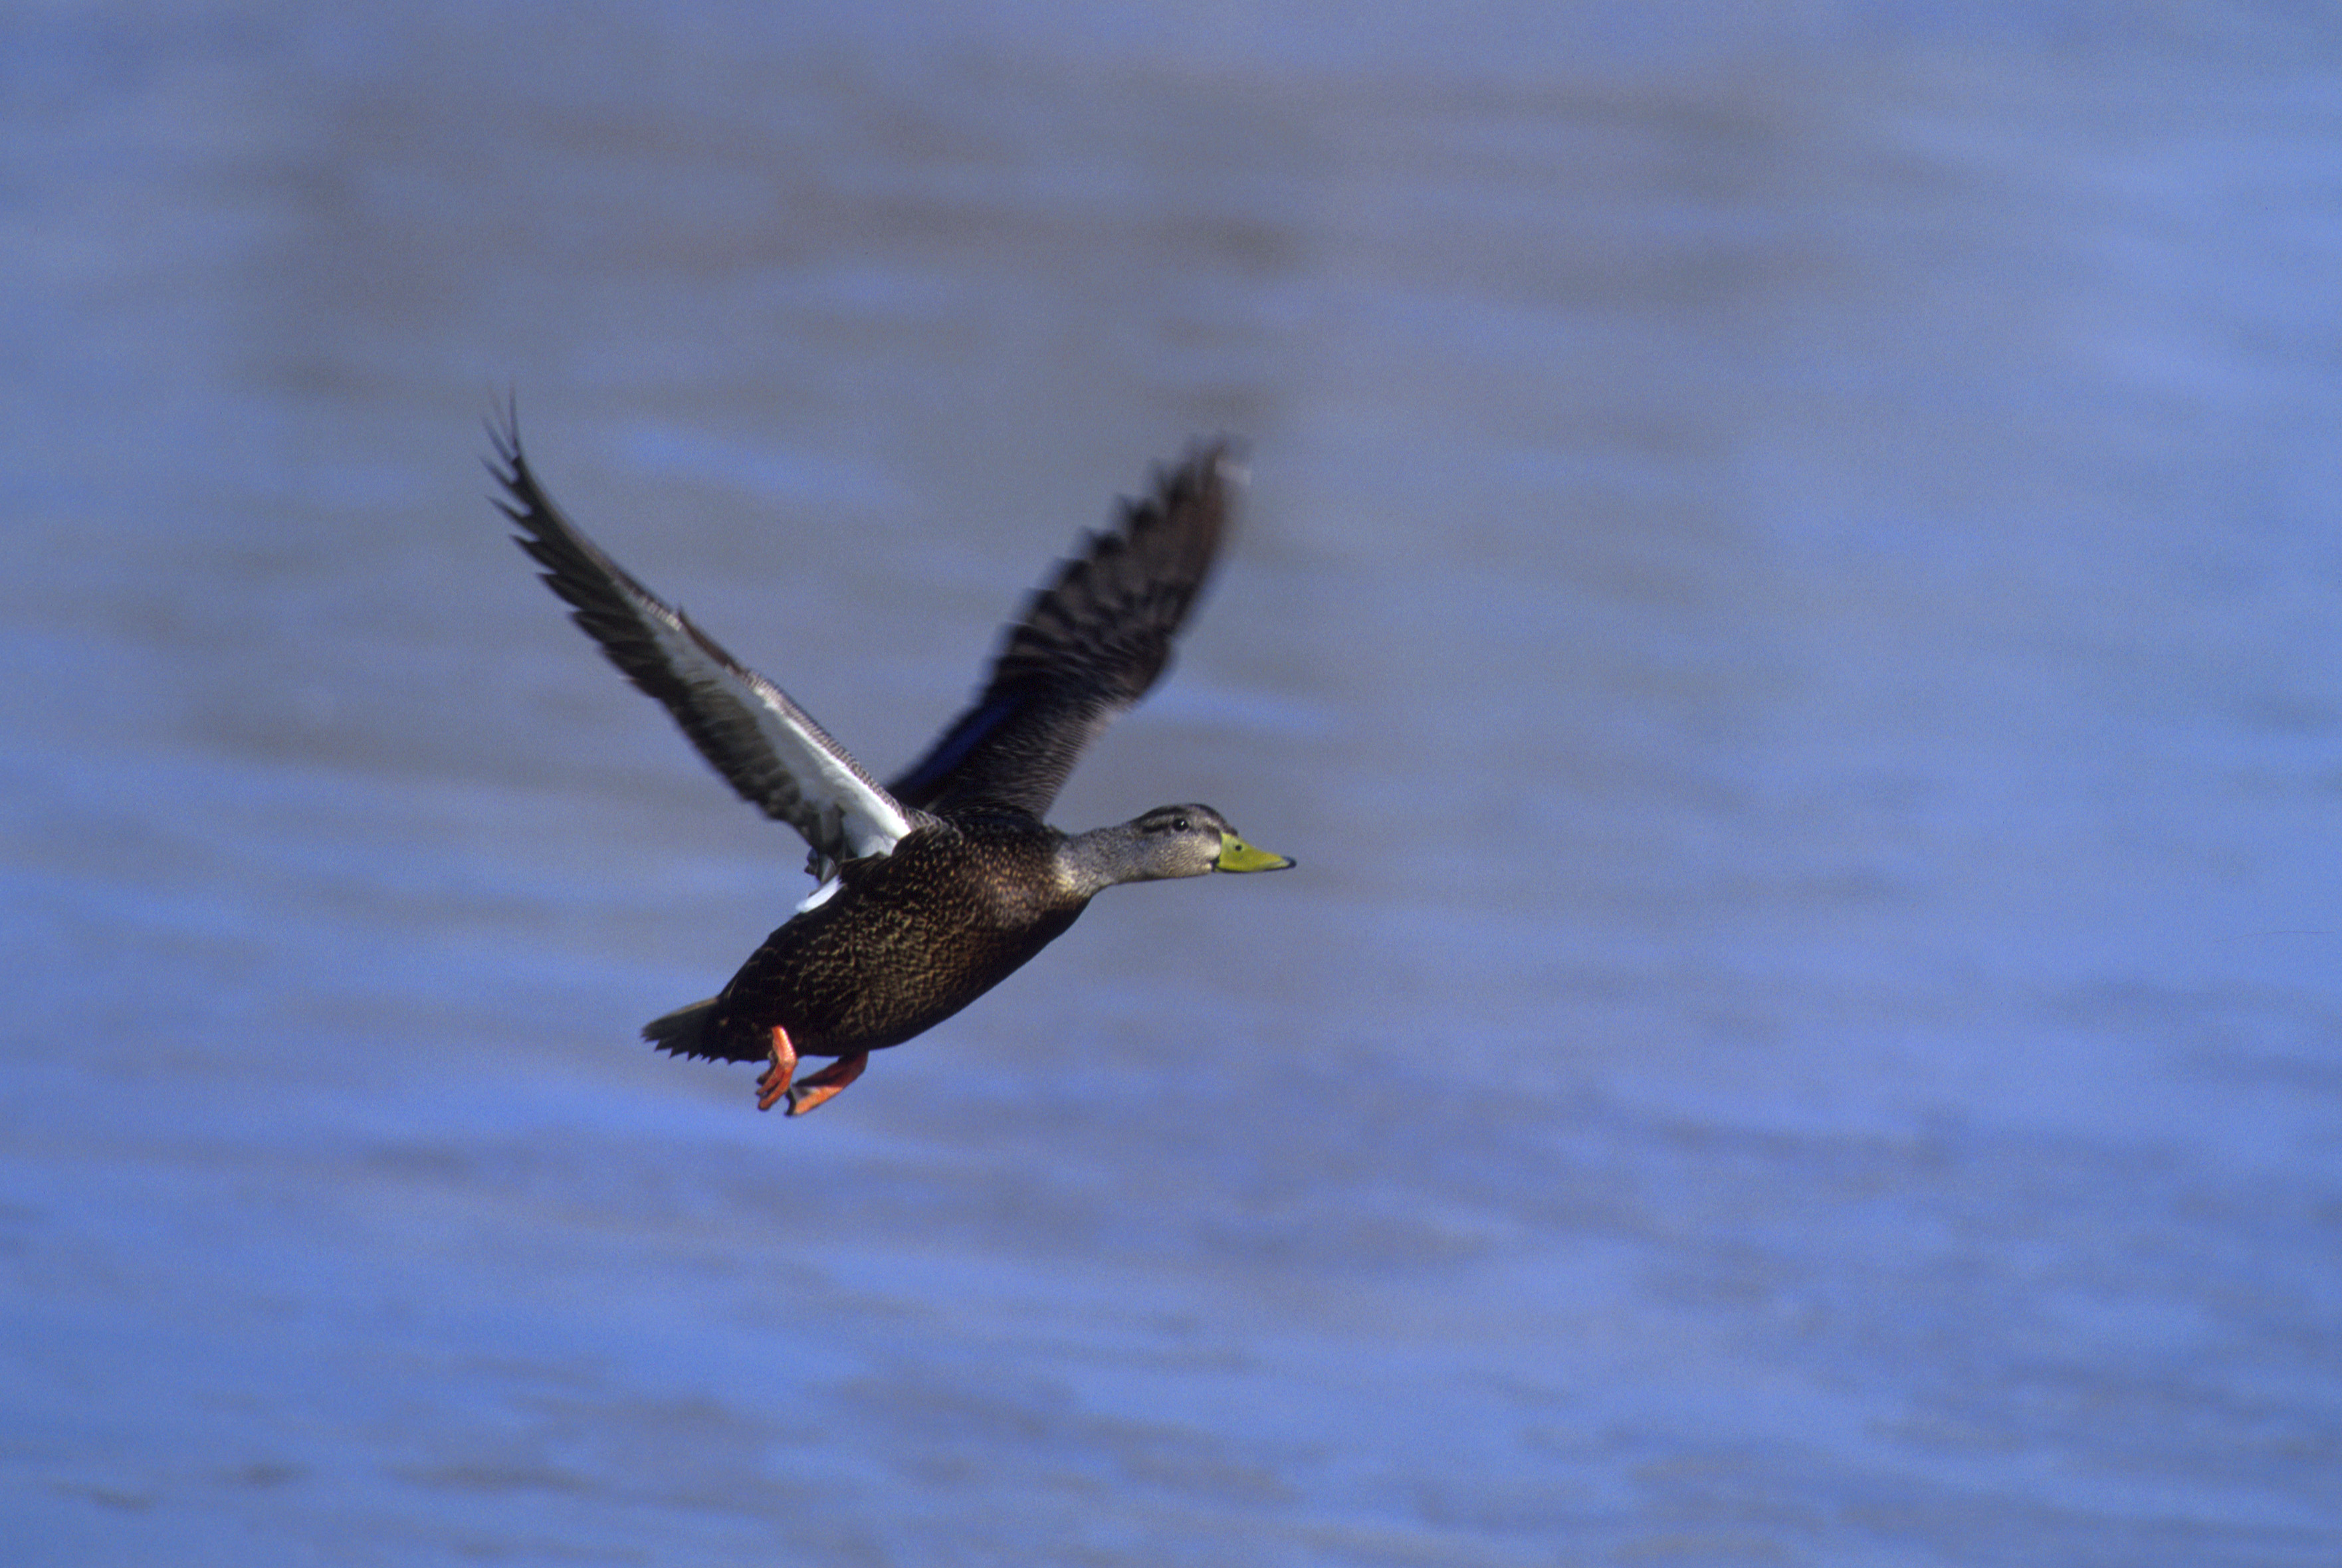 An American black duck flies just over the surface of blue water